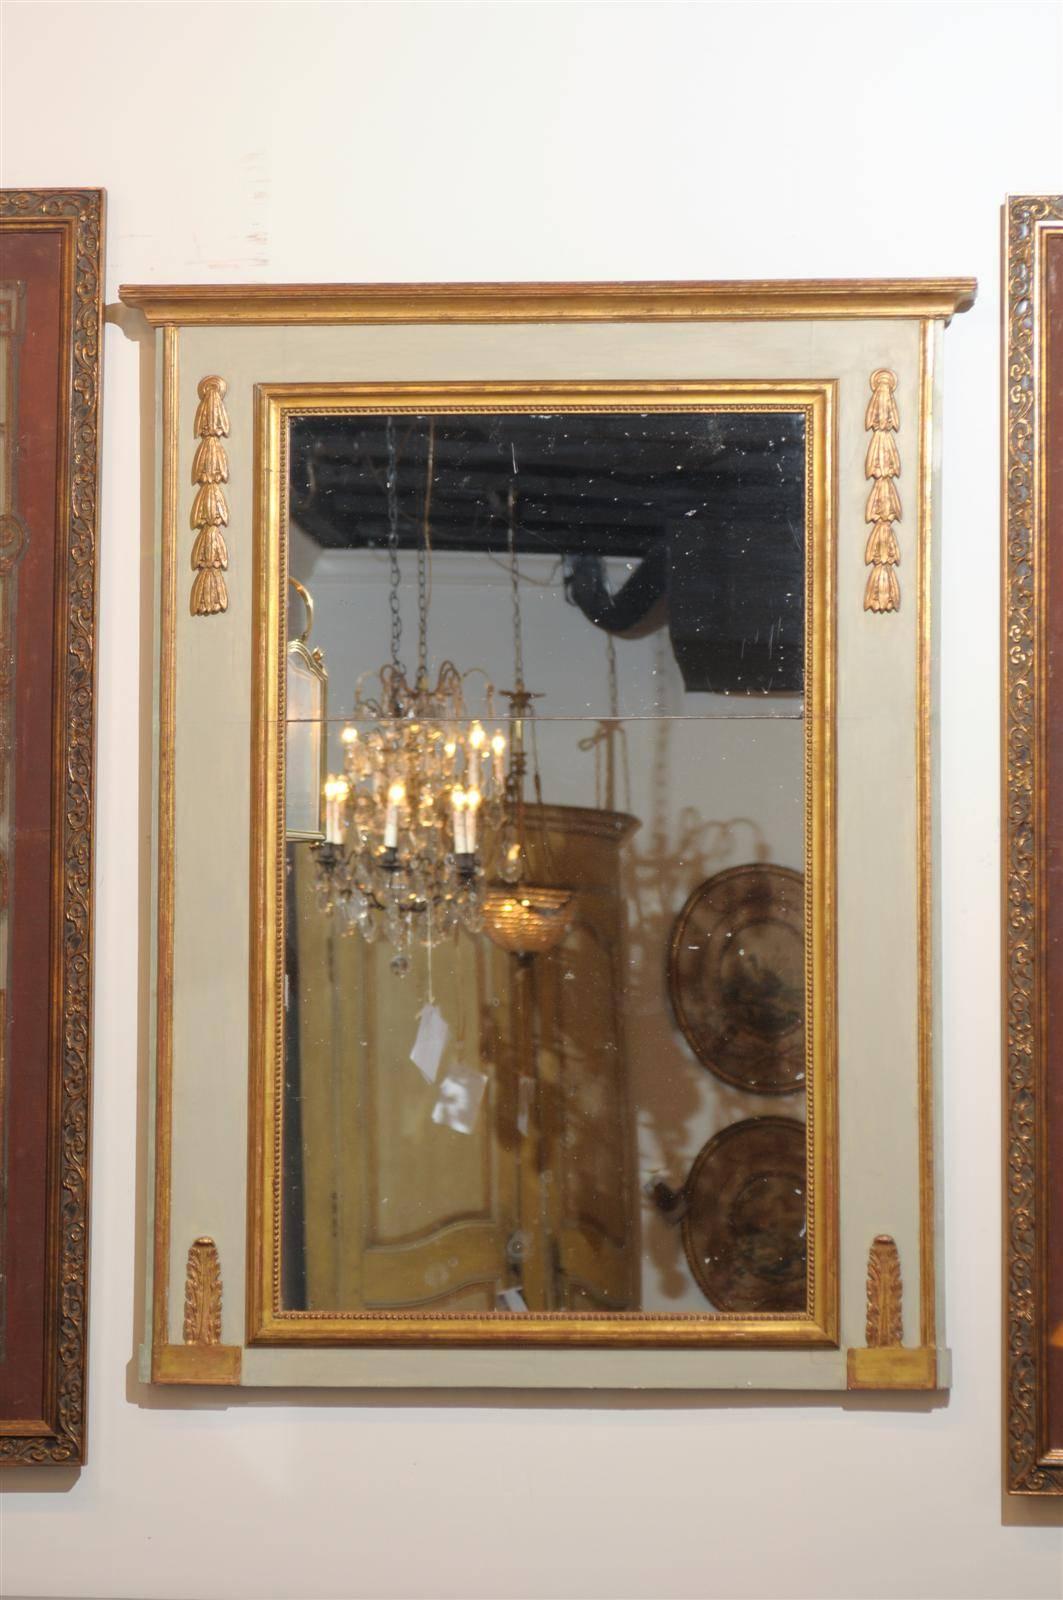 A French late 18th century period Directoire painted and gilded trumeau mirror with original split mercury glass, campanula and waterleaves. This French trumeau mirror features a clean profile, typical of the Directoire period. Painted in a light